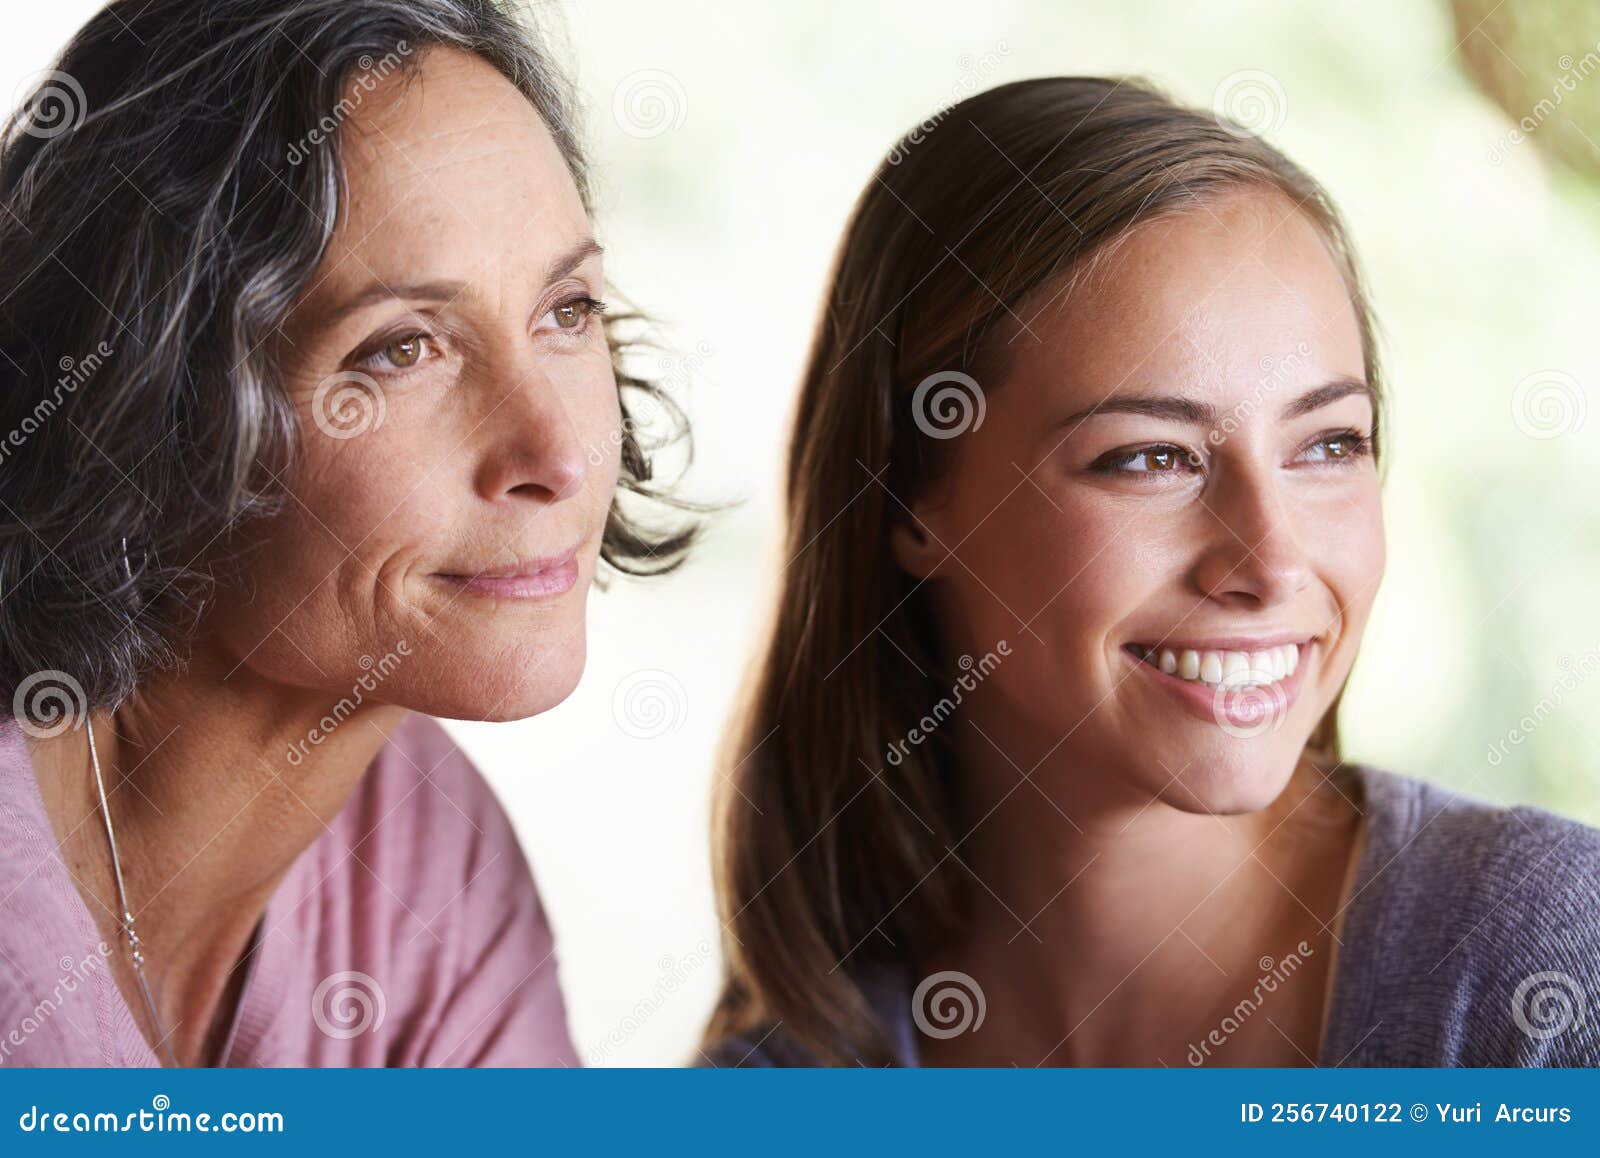 She Turned Into A Woman Her Mom Was Proud Of A Beautiful Mother And Daughter Looking Happy 